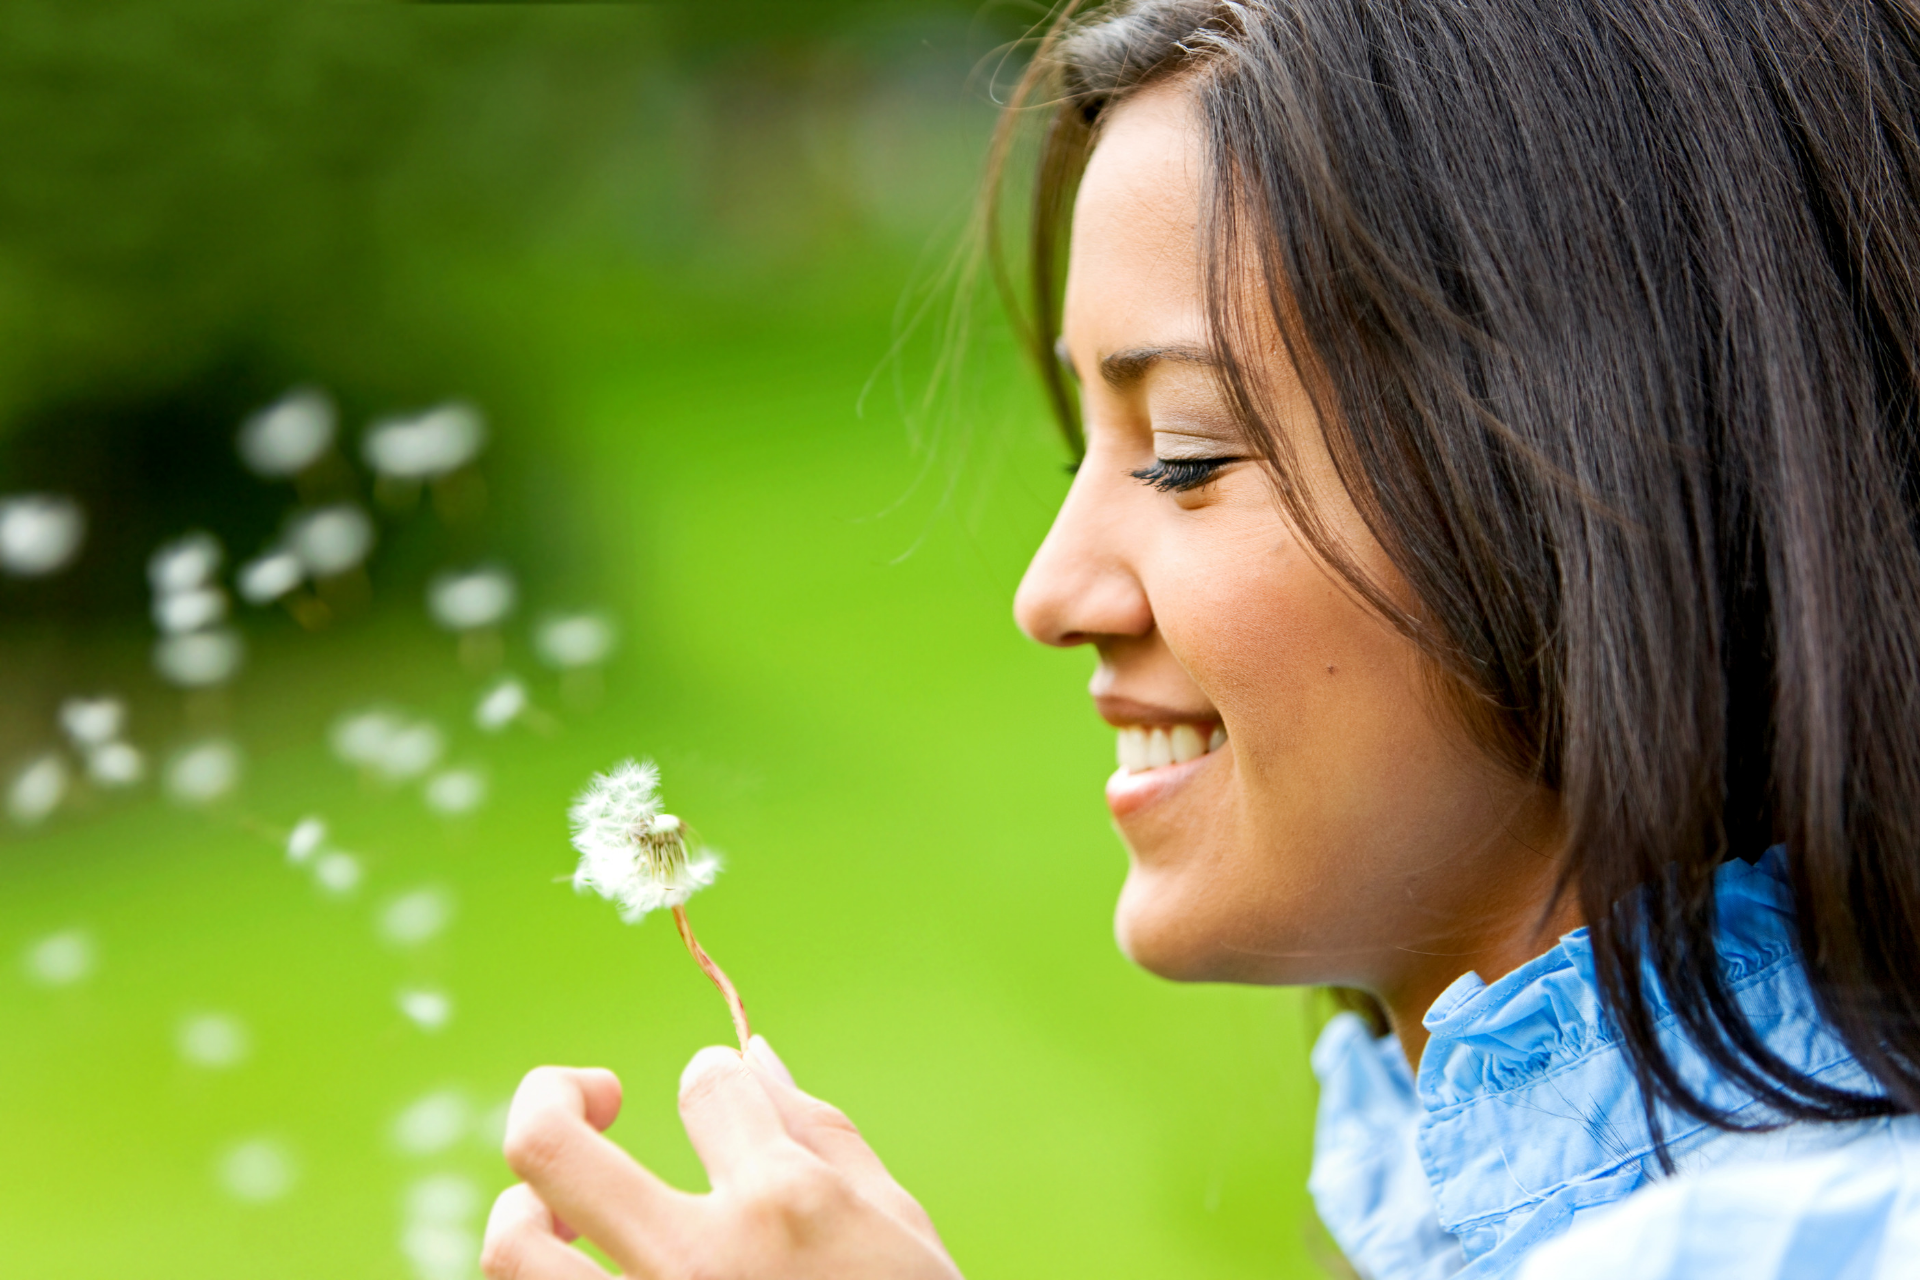 What are the Symptoms of Seasonal Allergies and the Treatment for Seasonal Allergies?